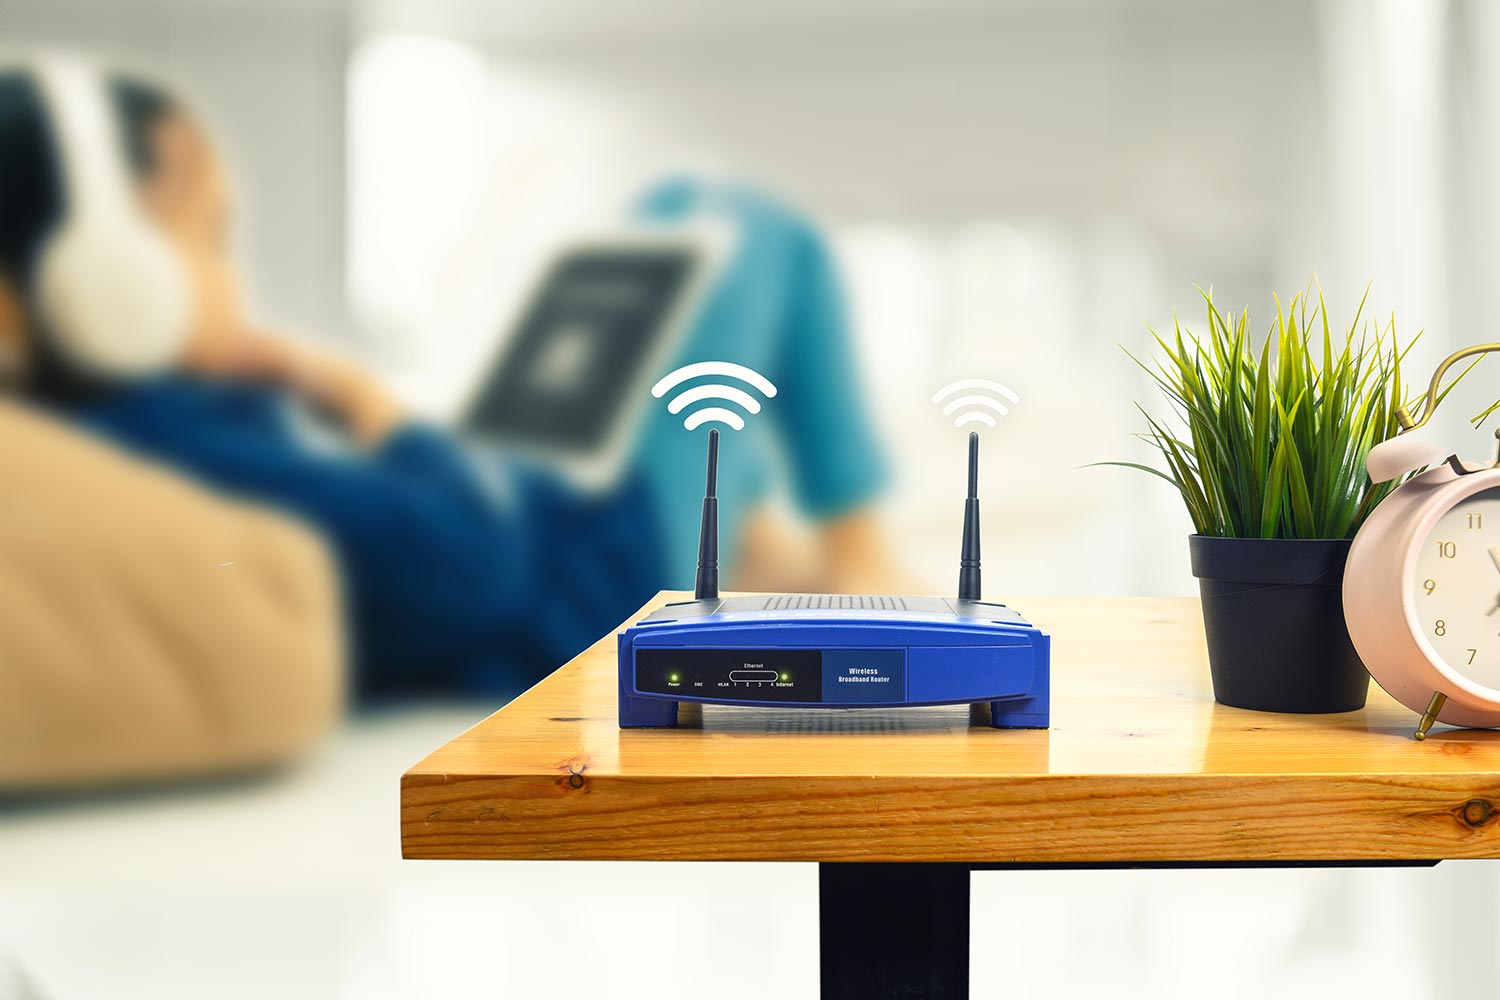 Wireless router and a man using smartphone on living room